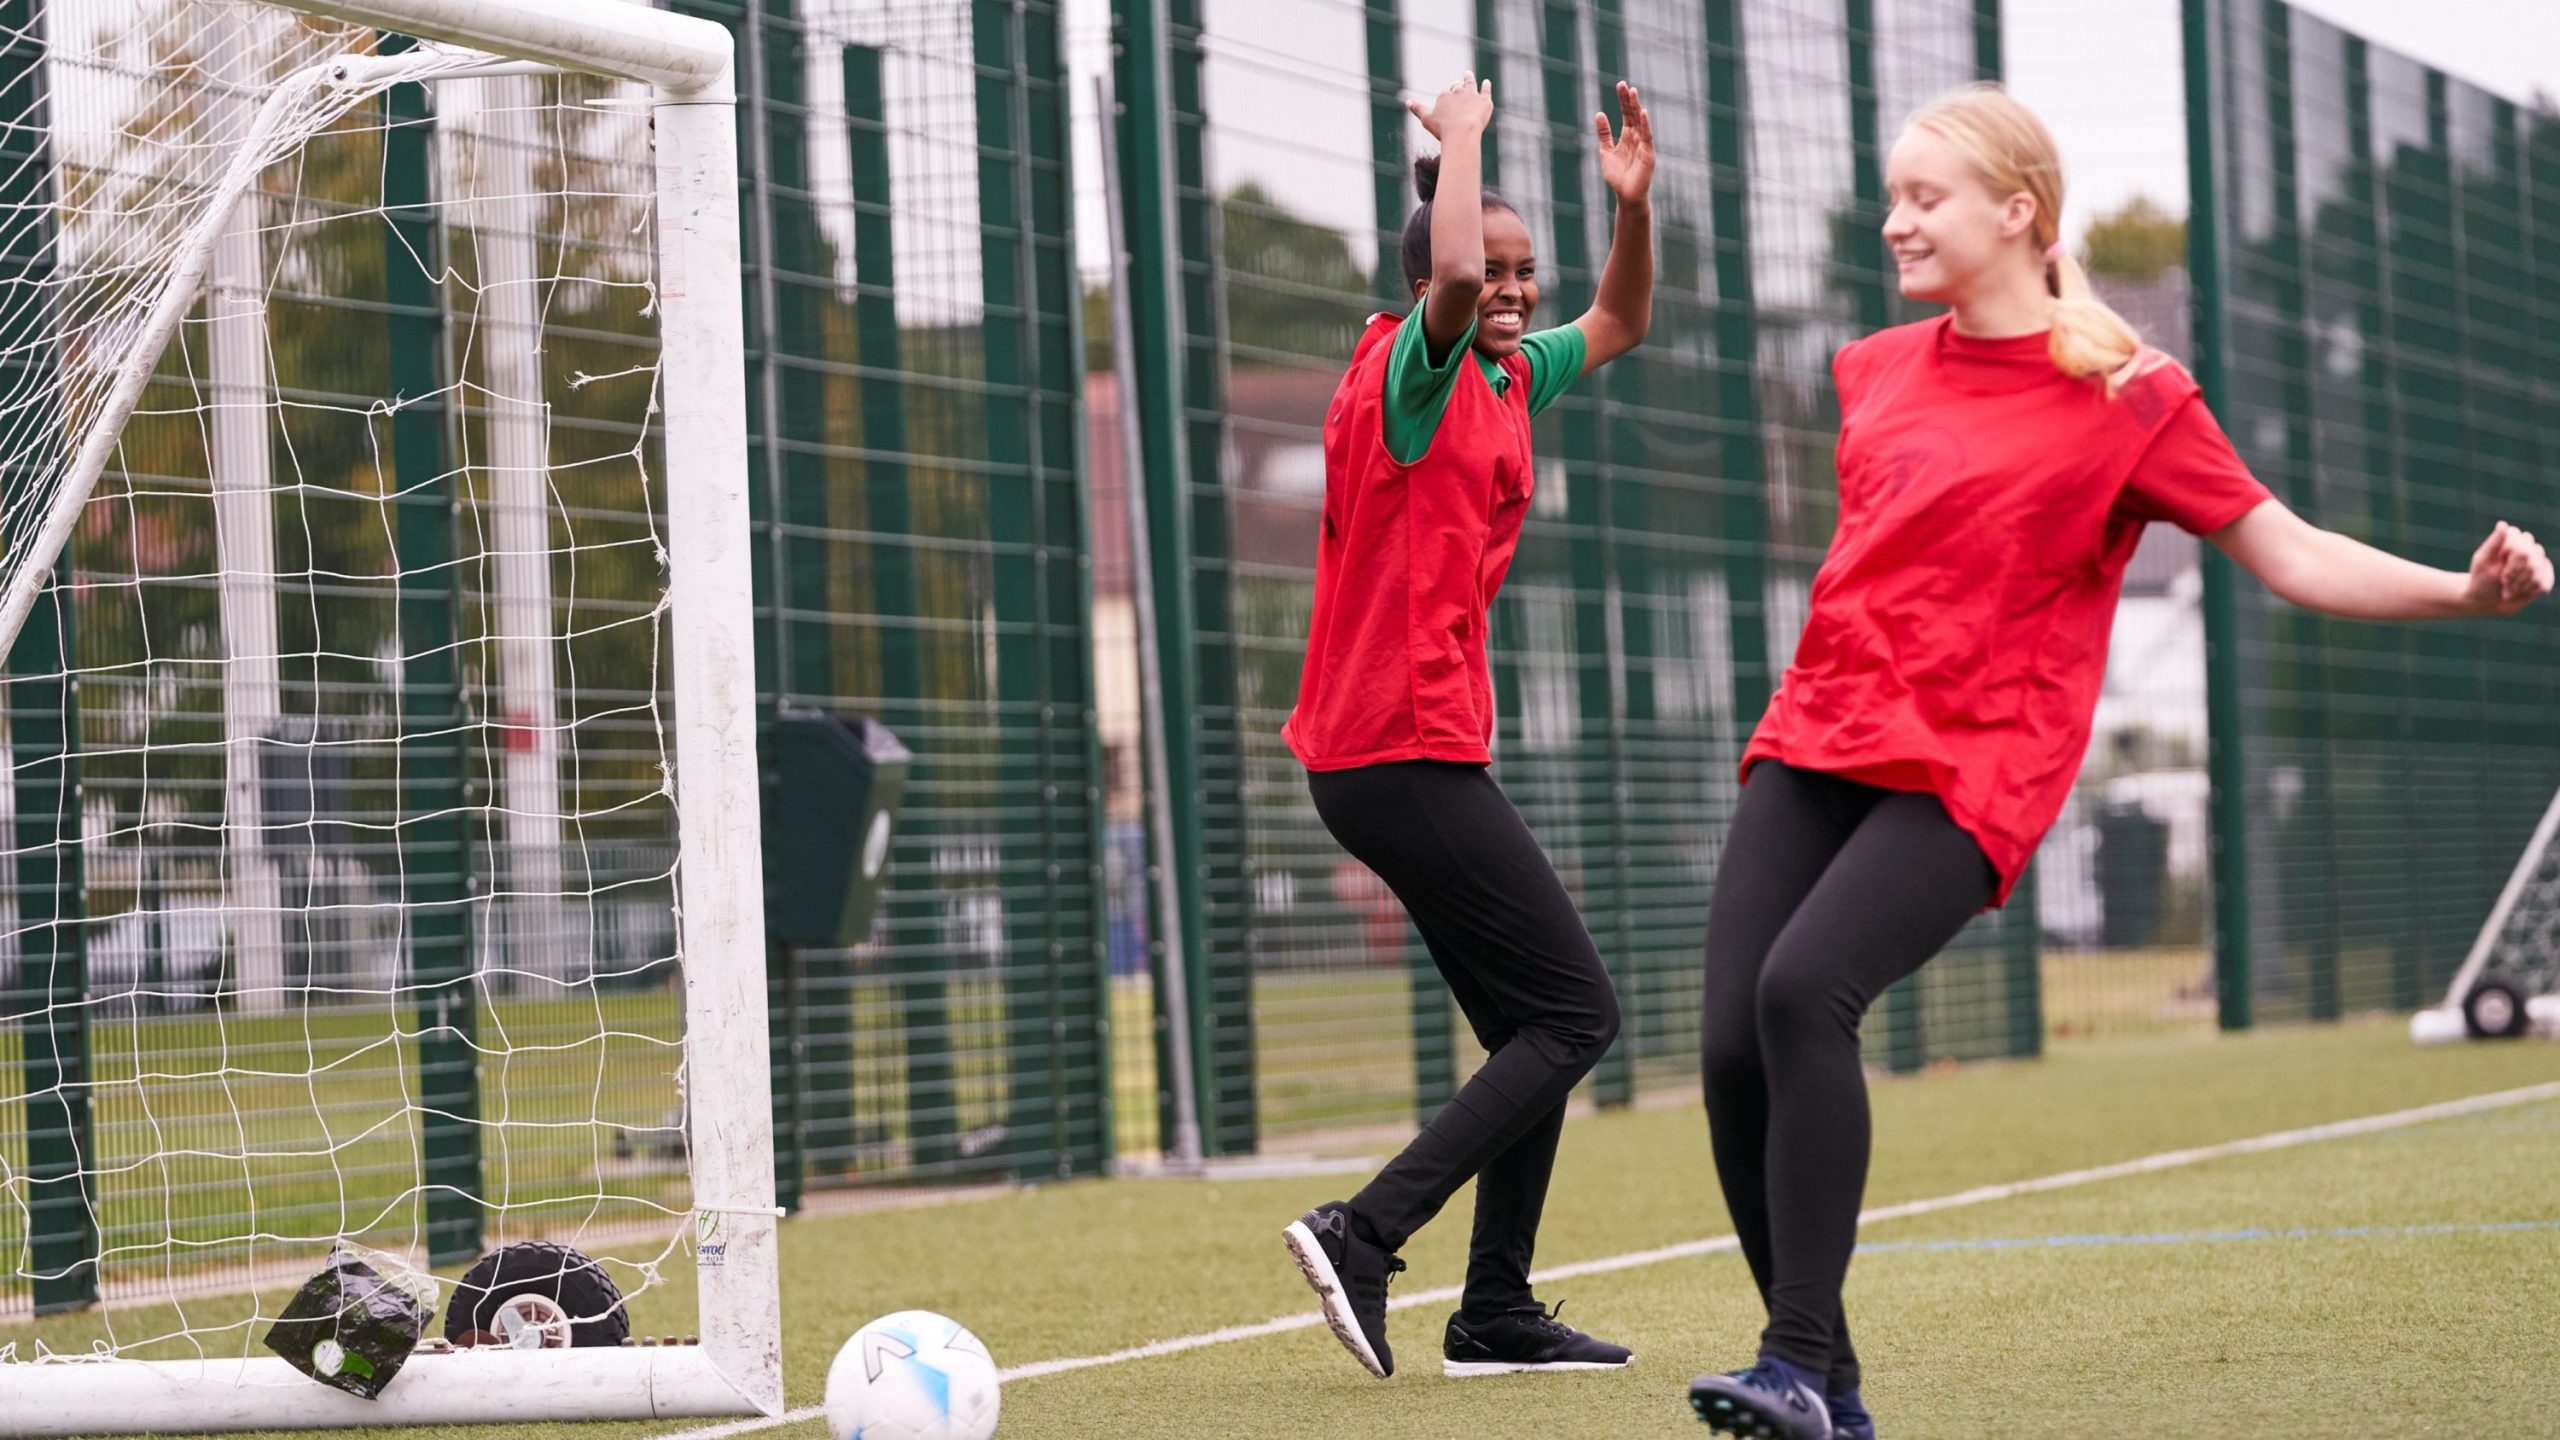 More 'sporty' girls now dream of reaching the top in sport - Women in Sport